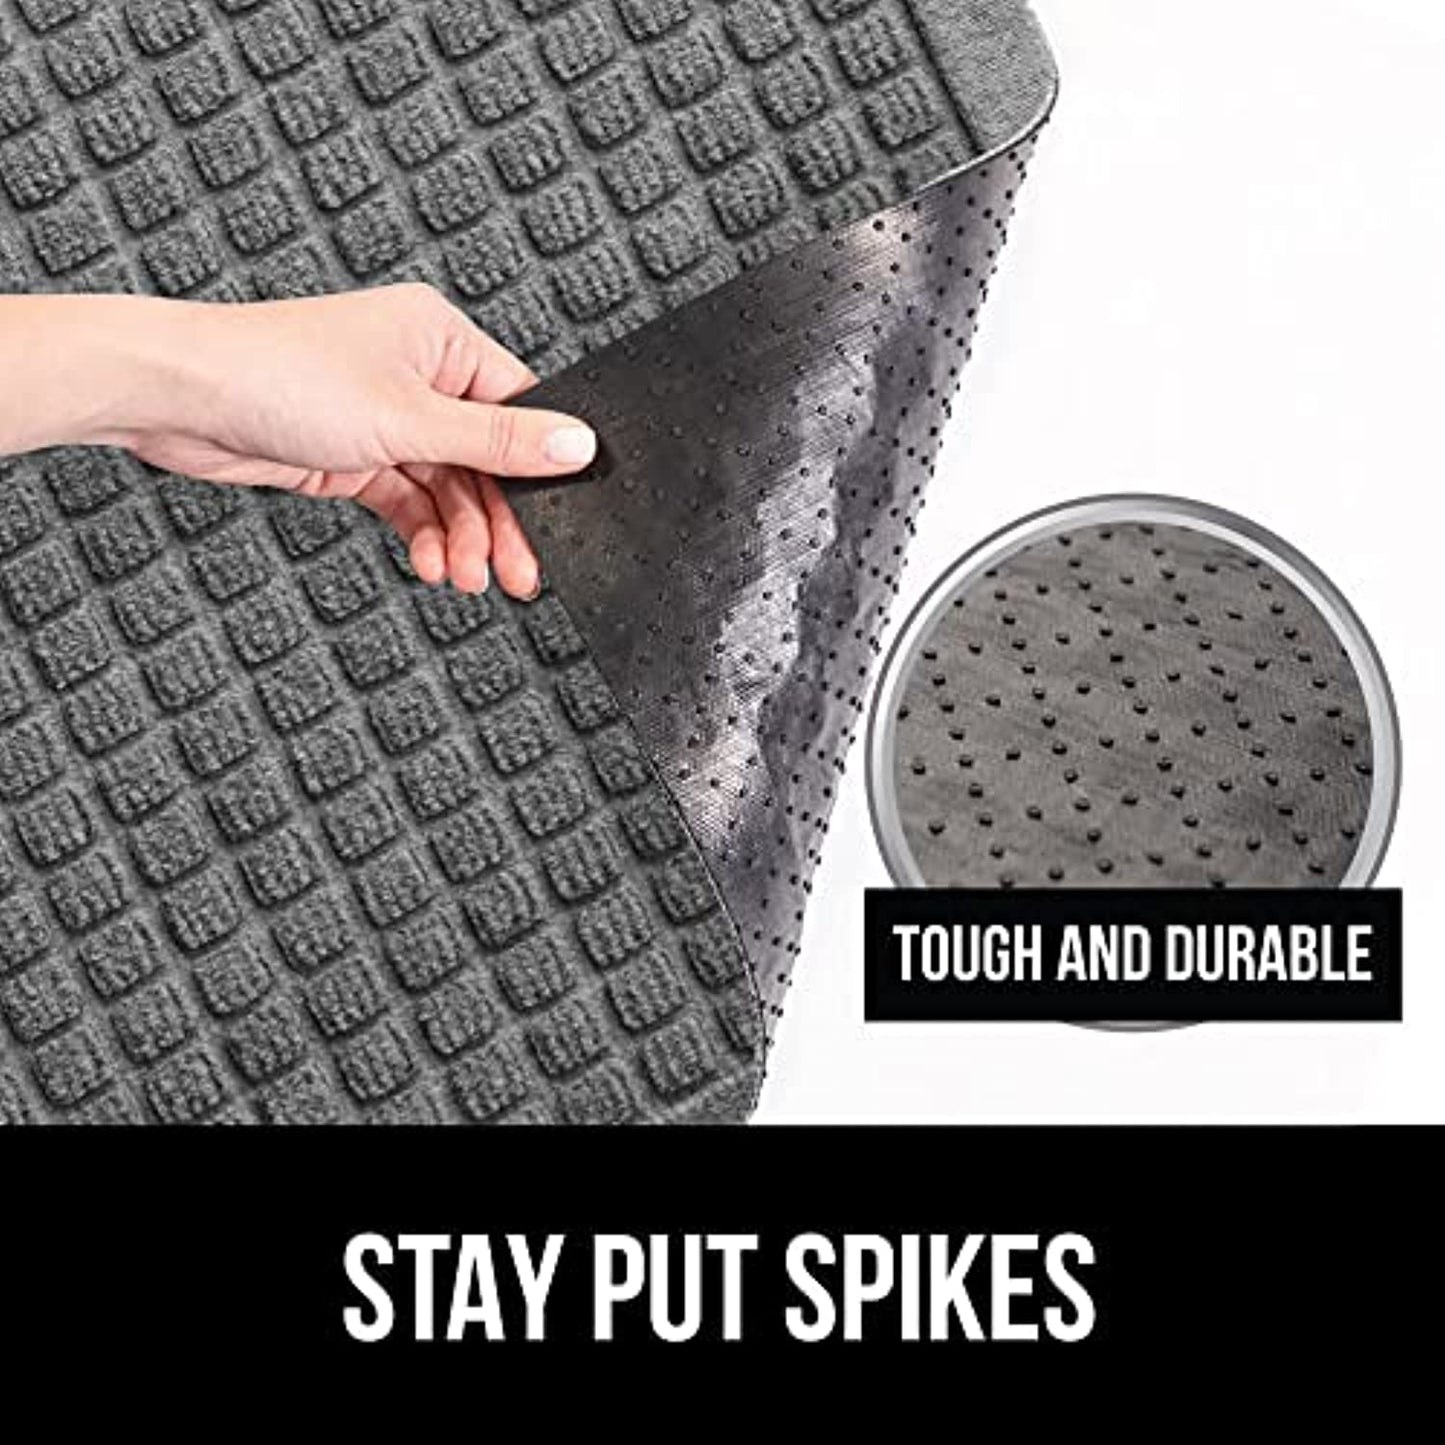 Gorilla Grip All Weather Absorbent Doormat  Dries Quickly  35x23  Absorbs Up to 5.7 Cups of Water  Captures Dirt  Stain and Fade Resistant  Durable Backing  Indoor Outdoor Mats  Boot Scraper  Gray